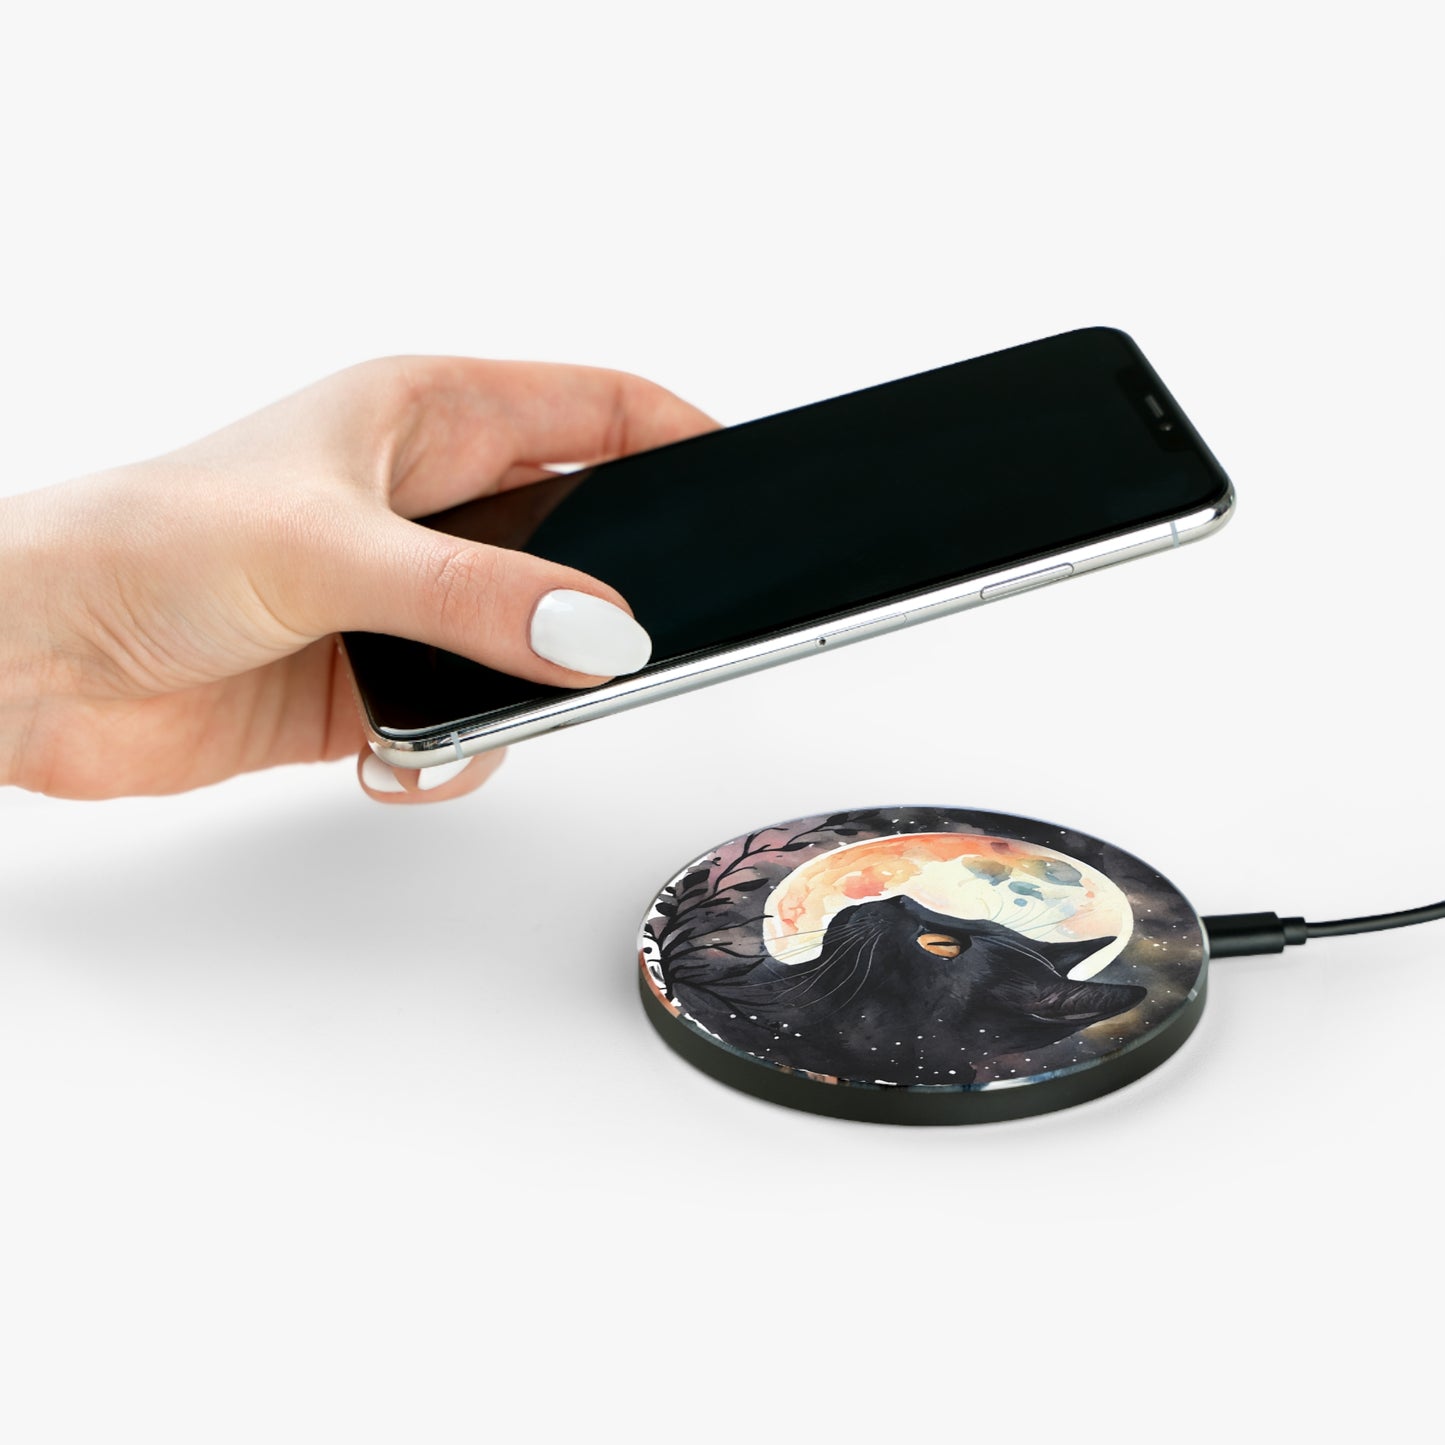 Wireless Charger - Cat & Moon Wireless Charger, Compatible with Latest iPhone and Android Models, Includes 47" Micro USB Cable